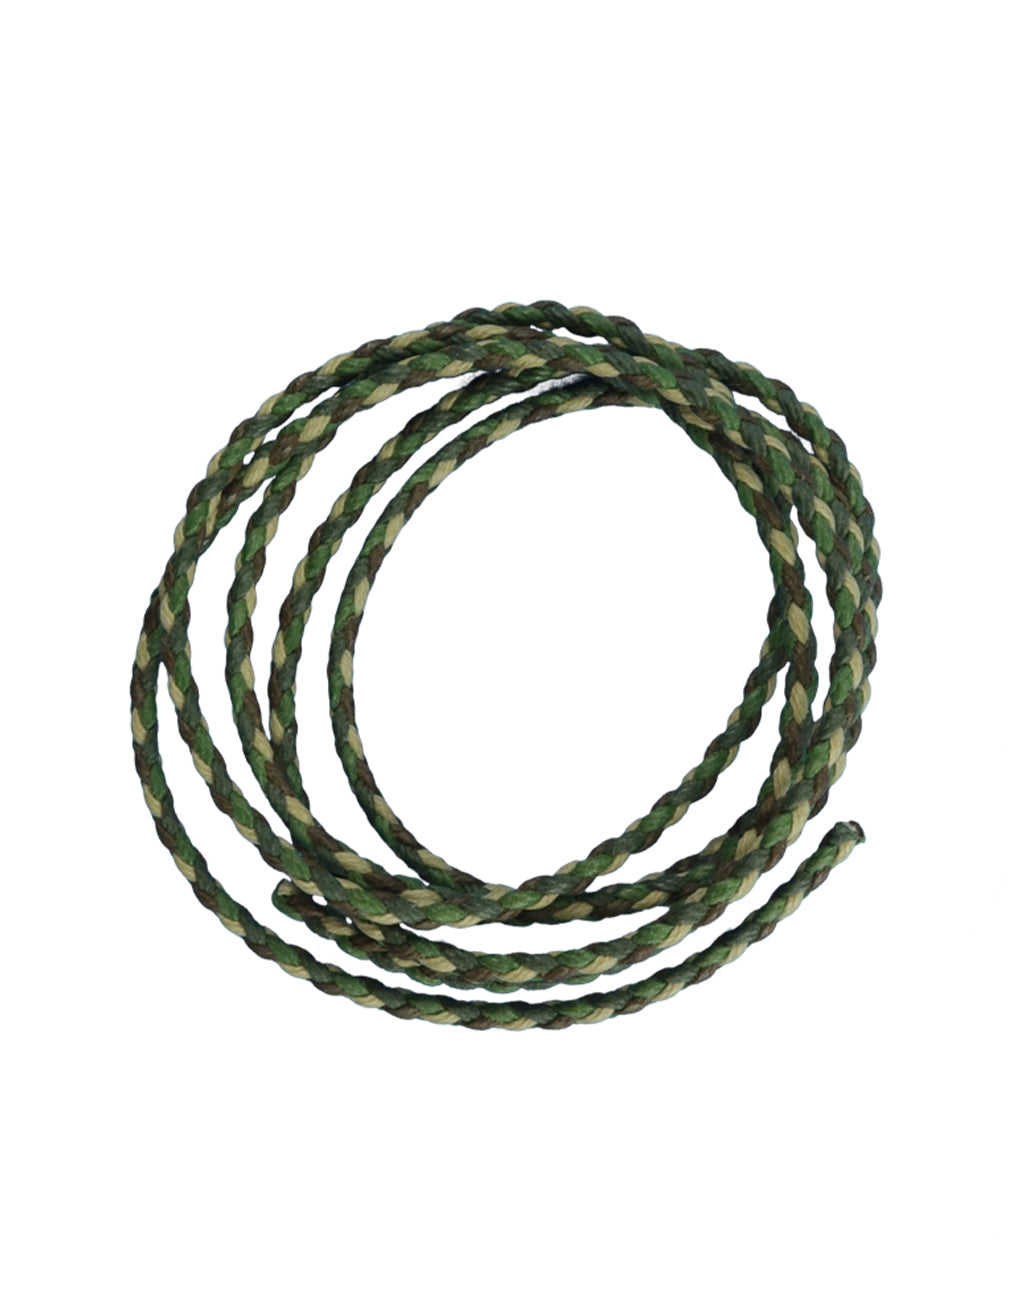 Camo Vegan Leather Braided Cord, 2mm, (3ft)